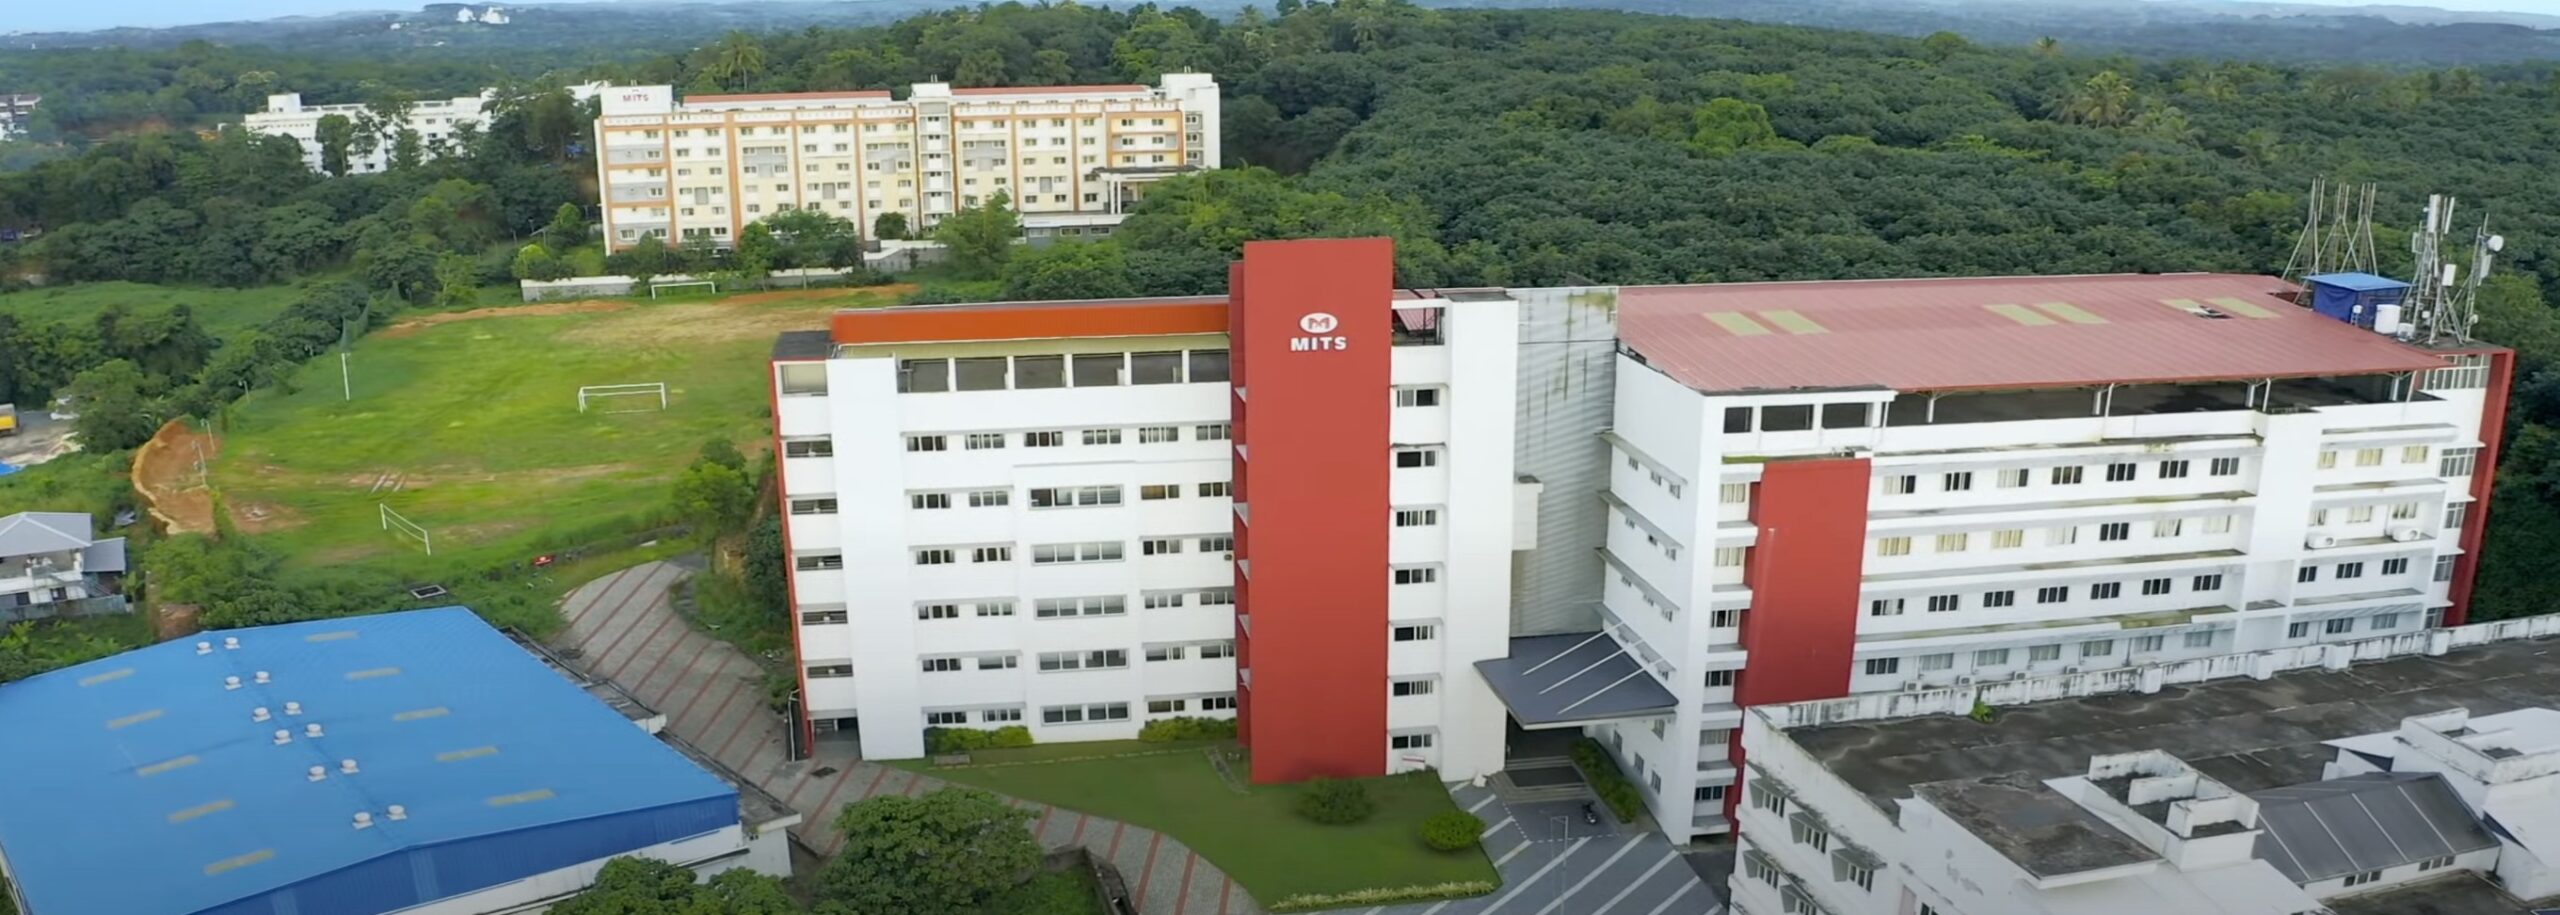 Muthoot Institute of Technology and Science, Ernakulam Image